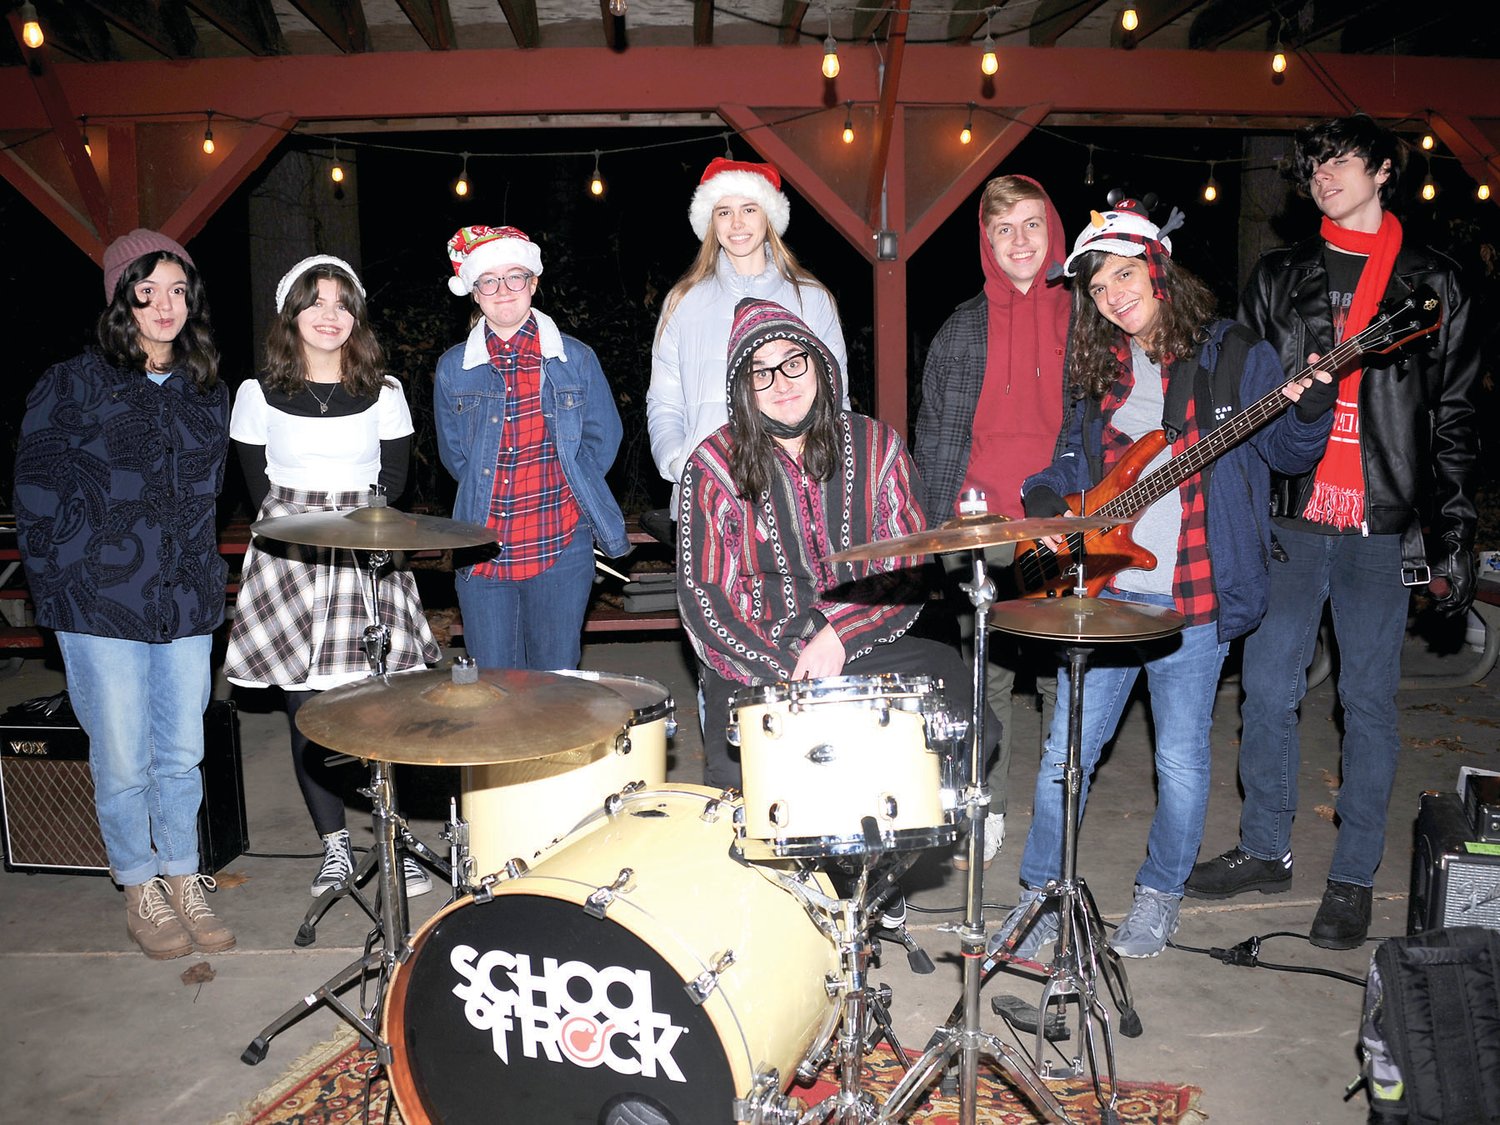 School of Rock in Doylestown provided music for the evening.